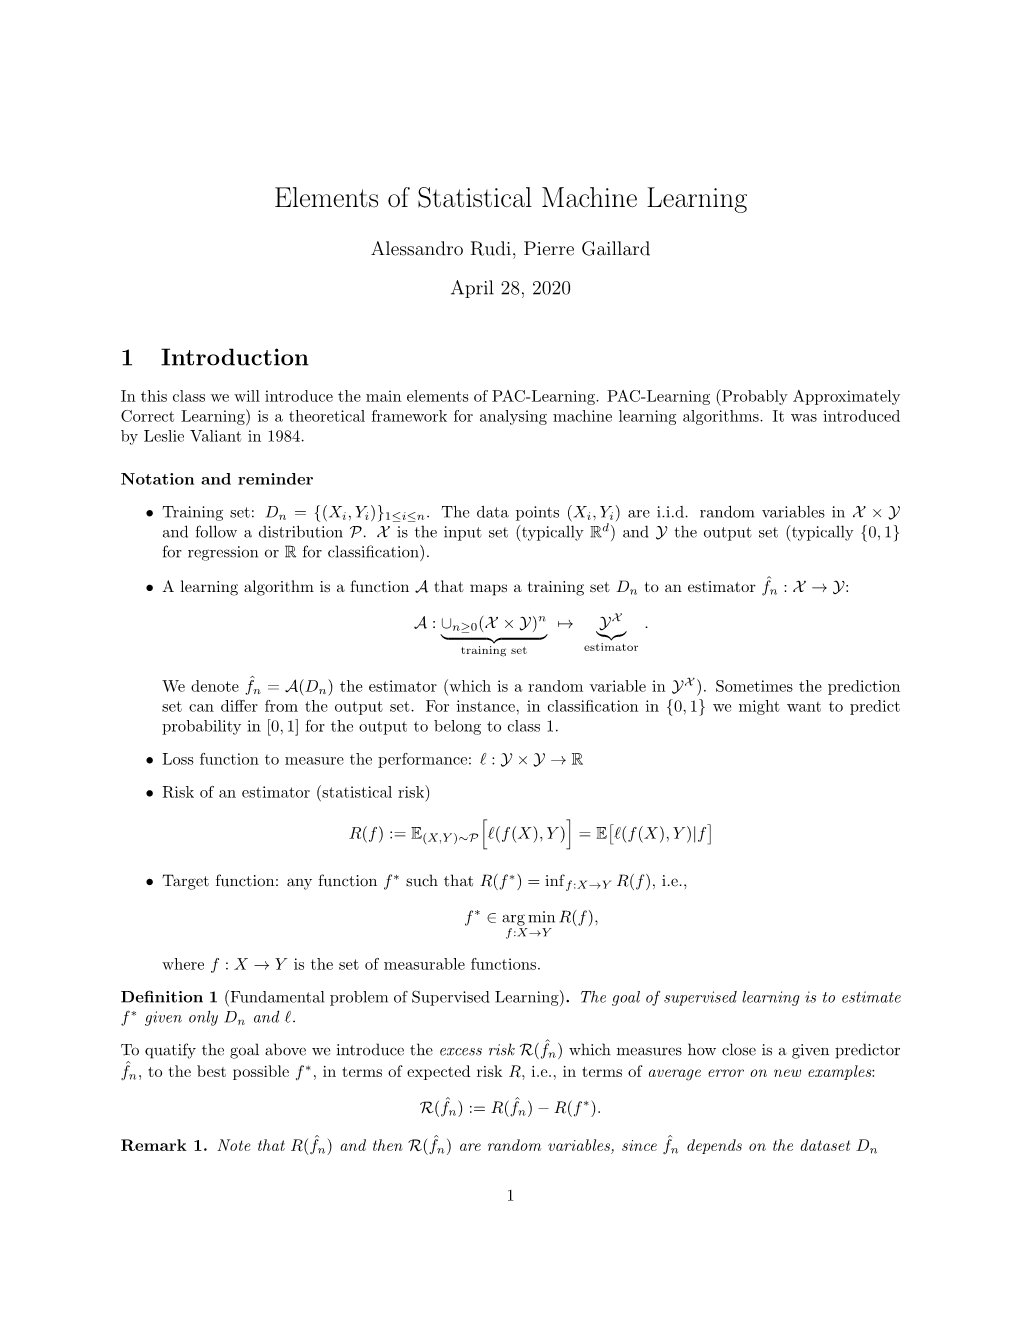 Elements of Statistical Machine Learning